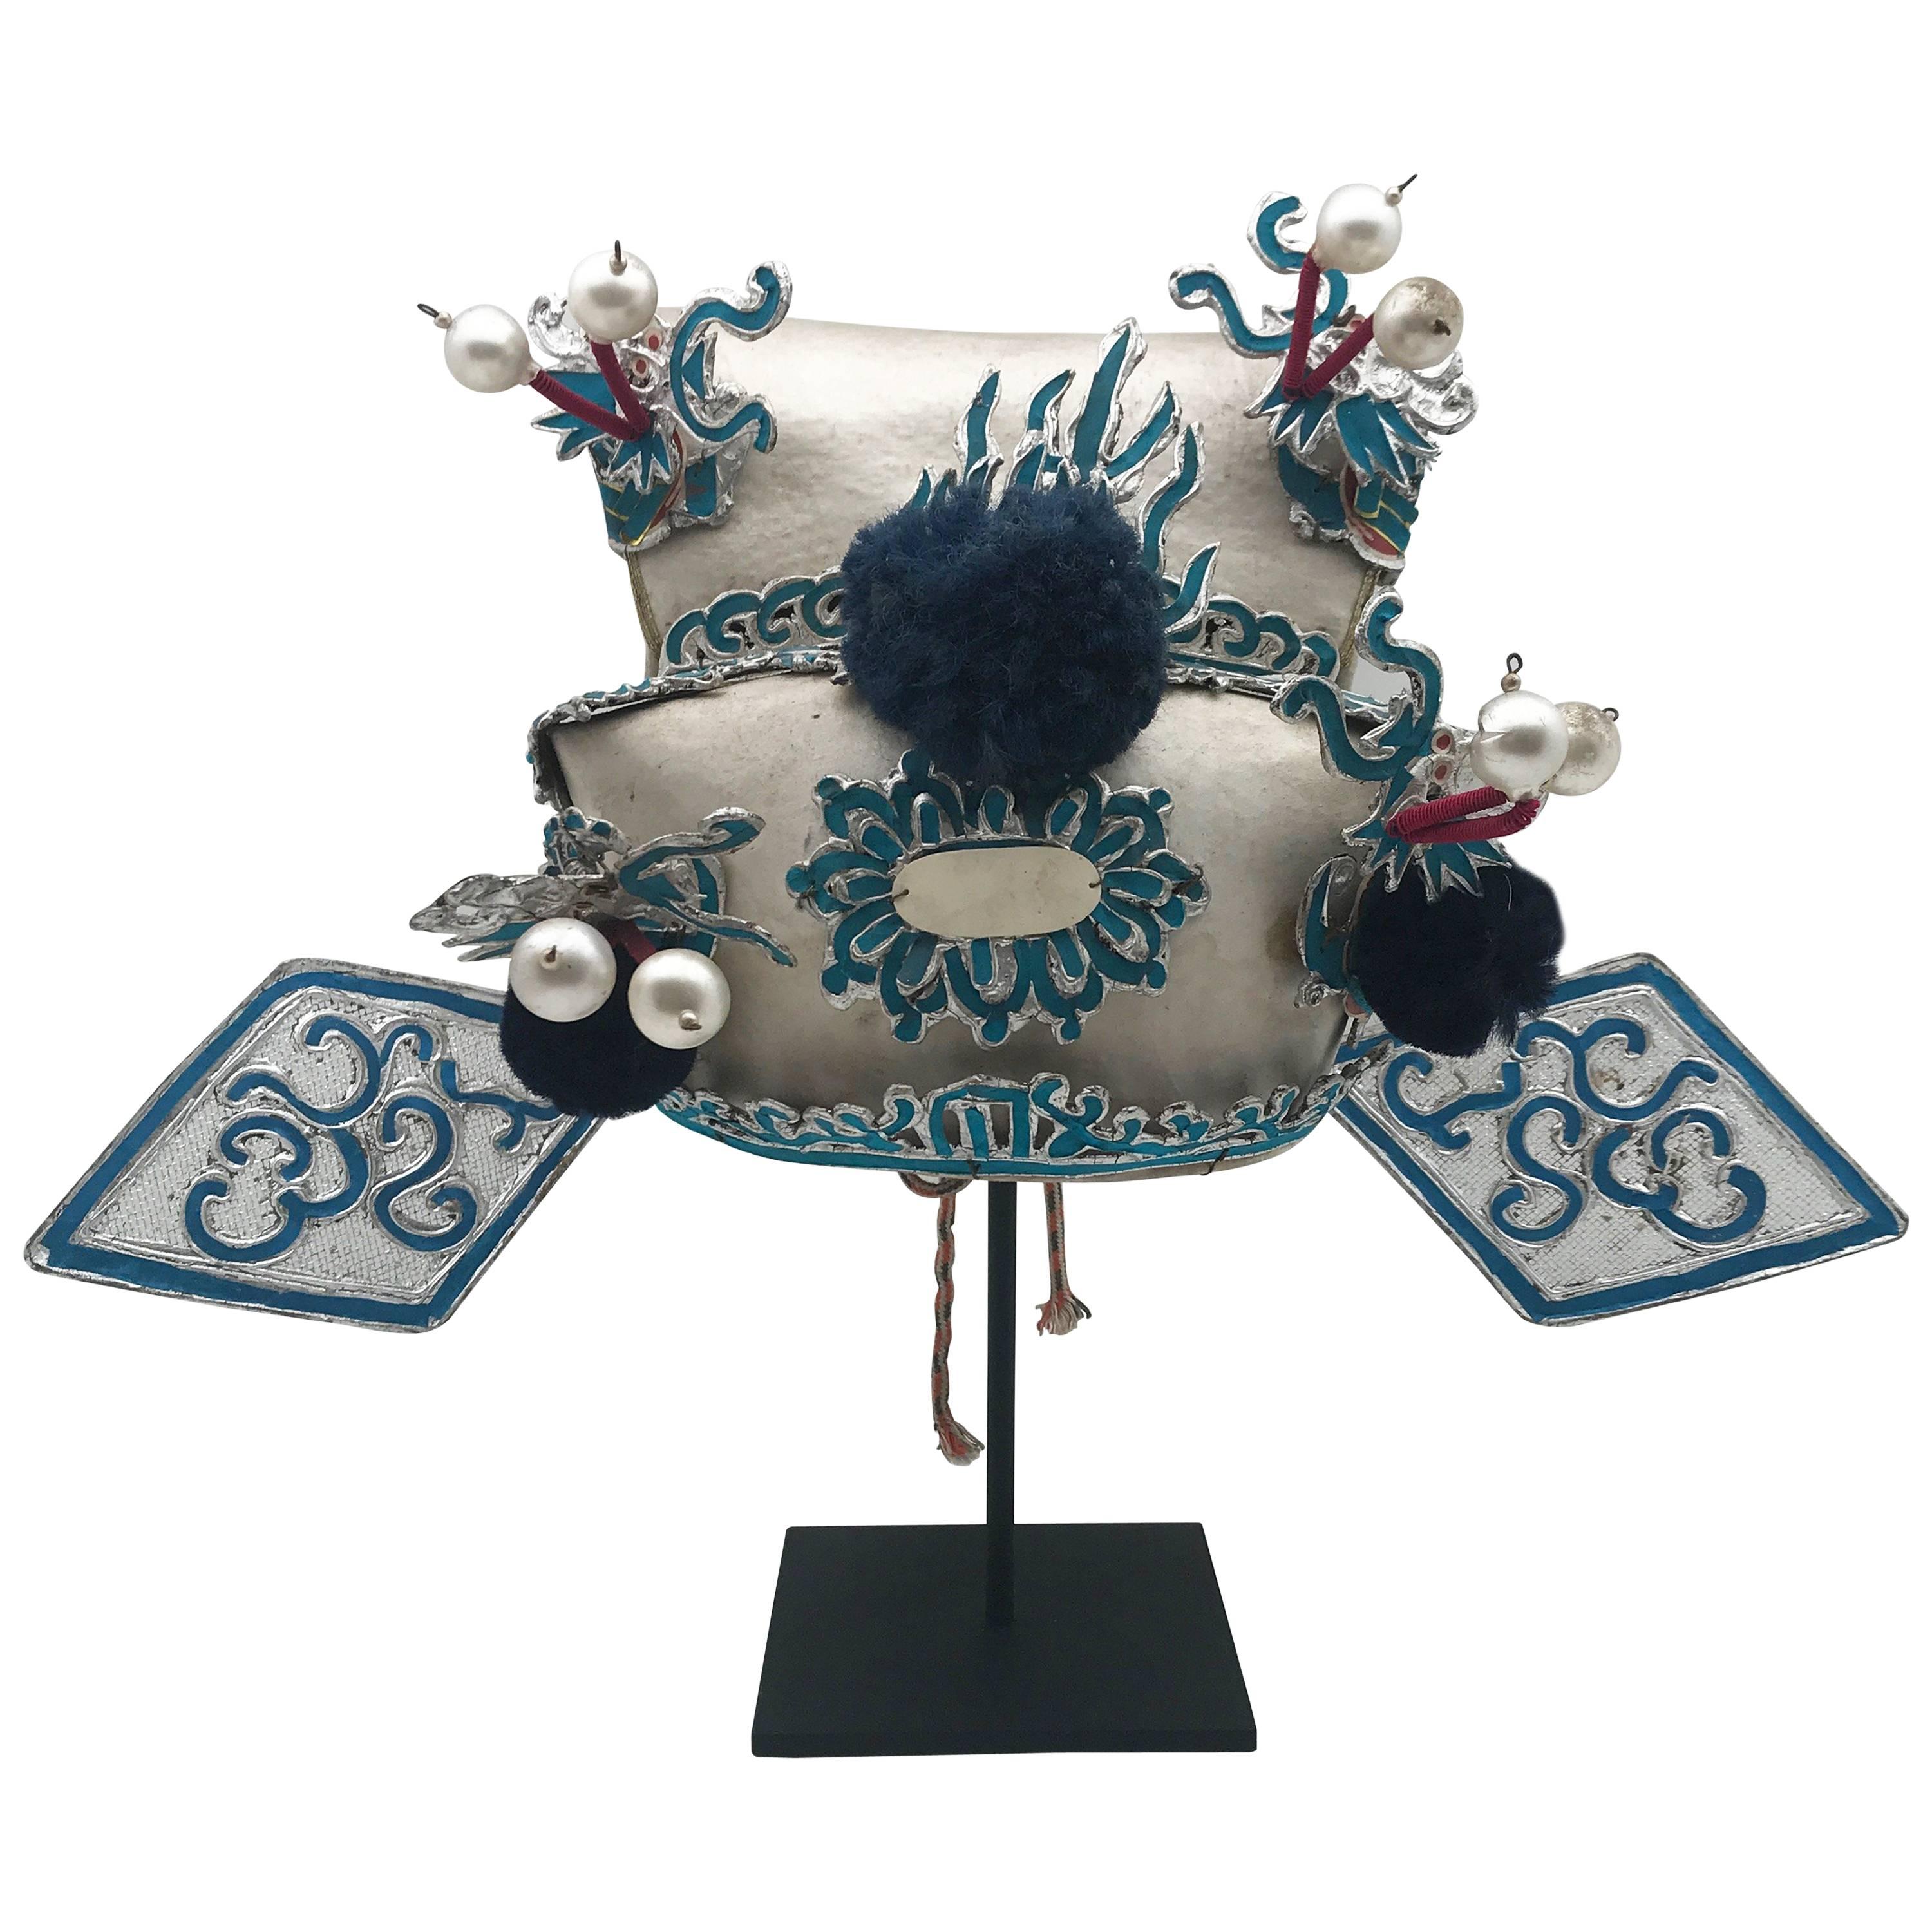 Vintage Chinese Opera Theatre Headdress in Turquoise with Midnight Blue Pom Poms